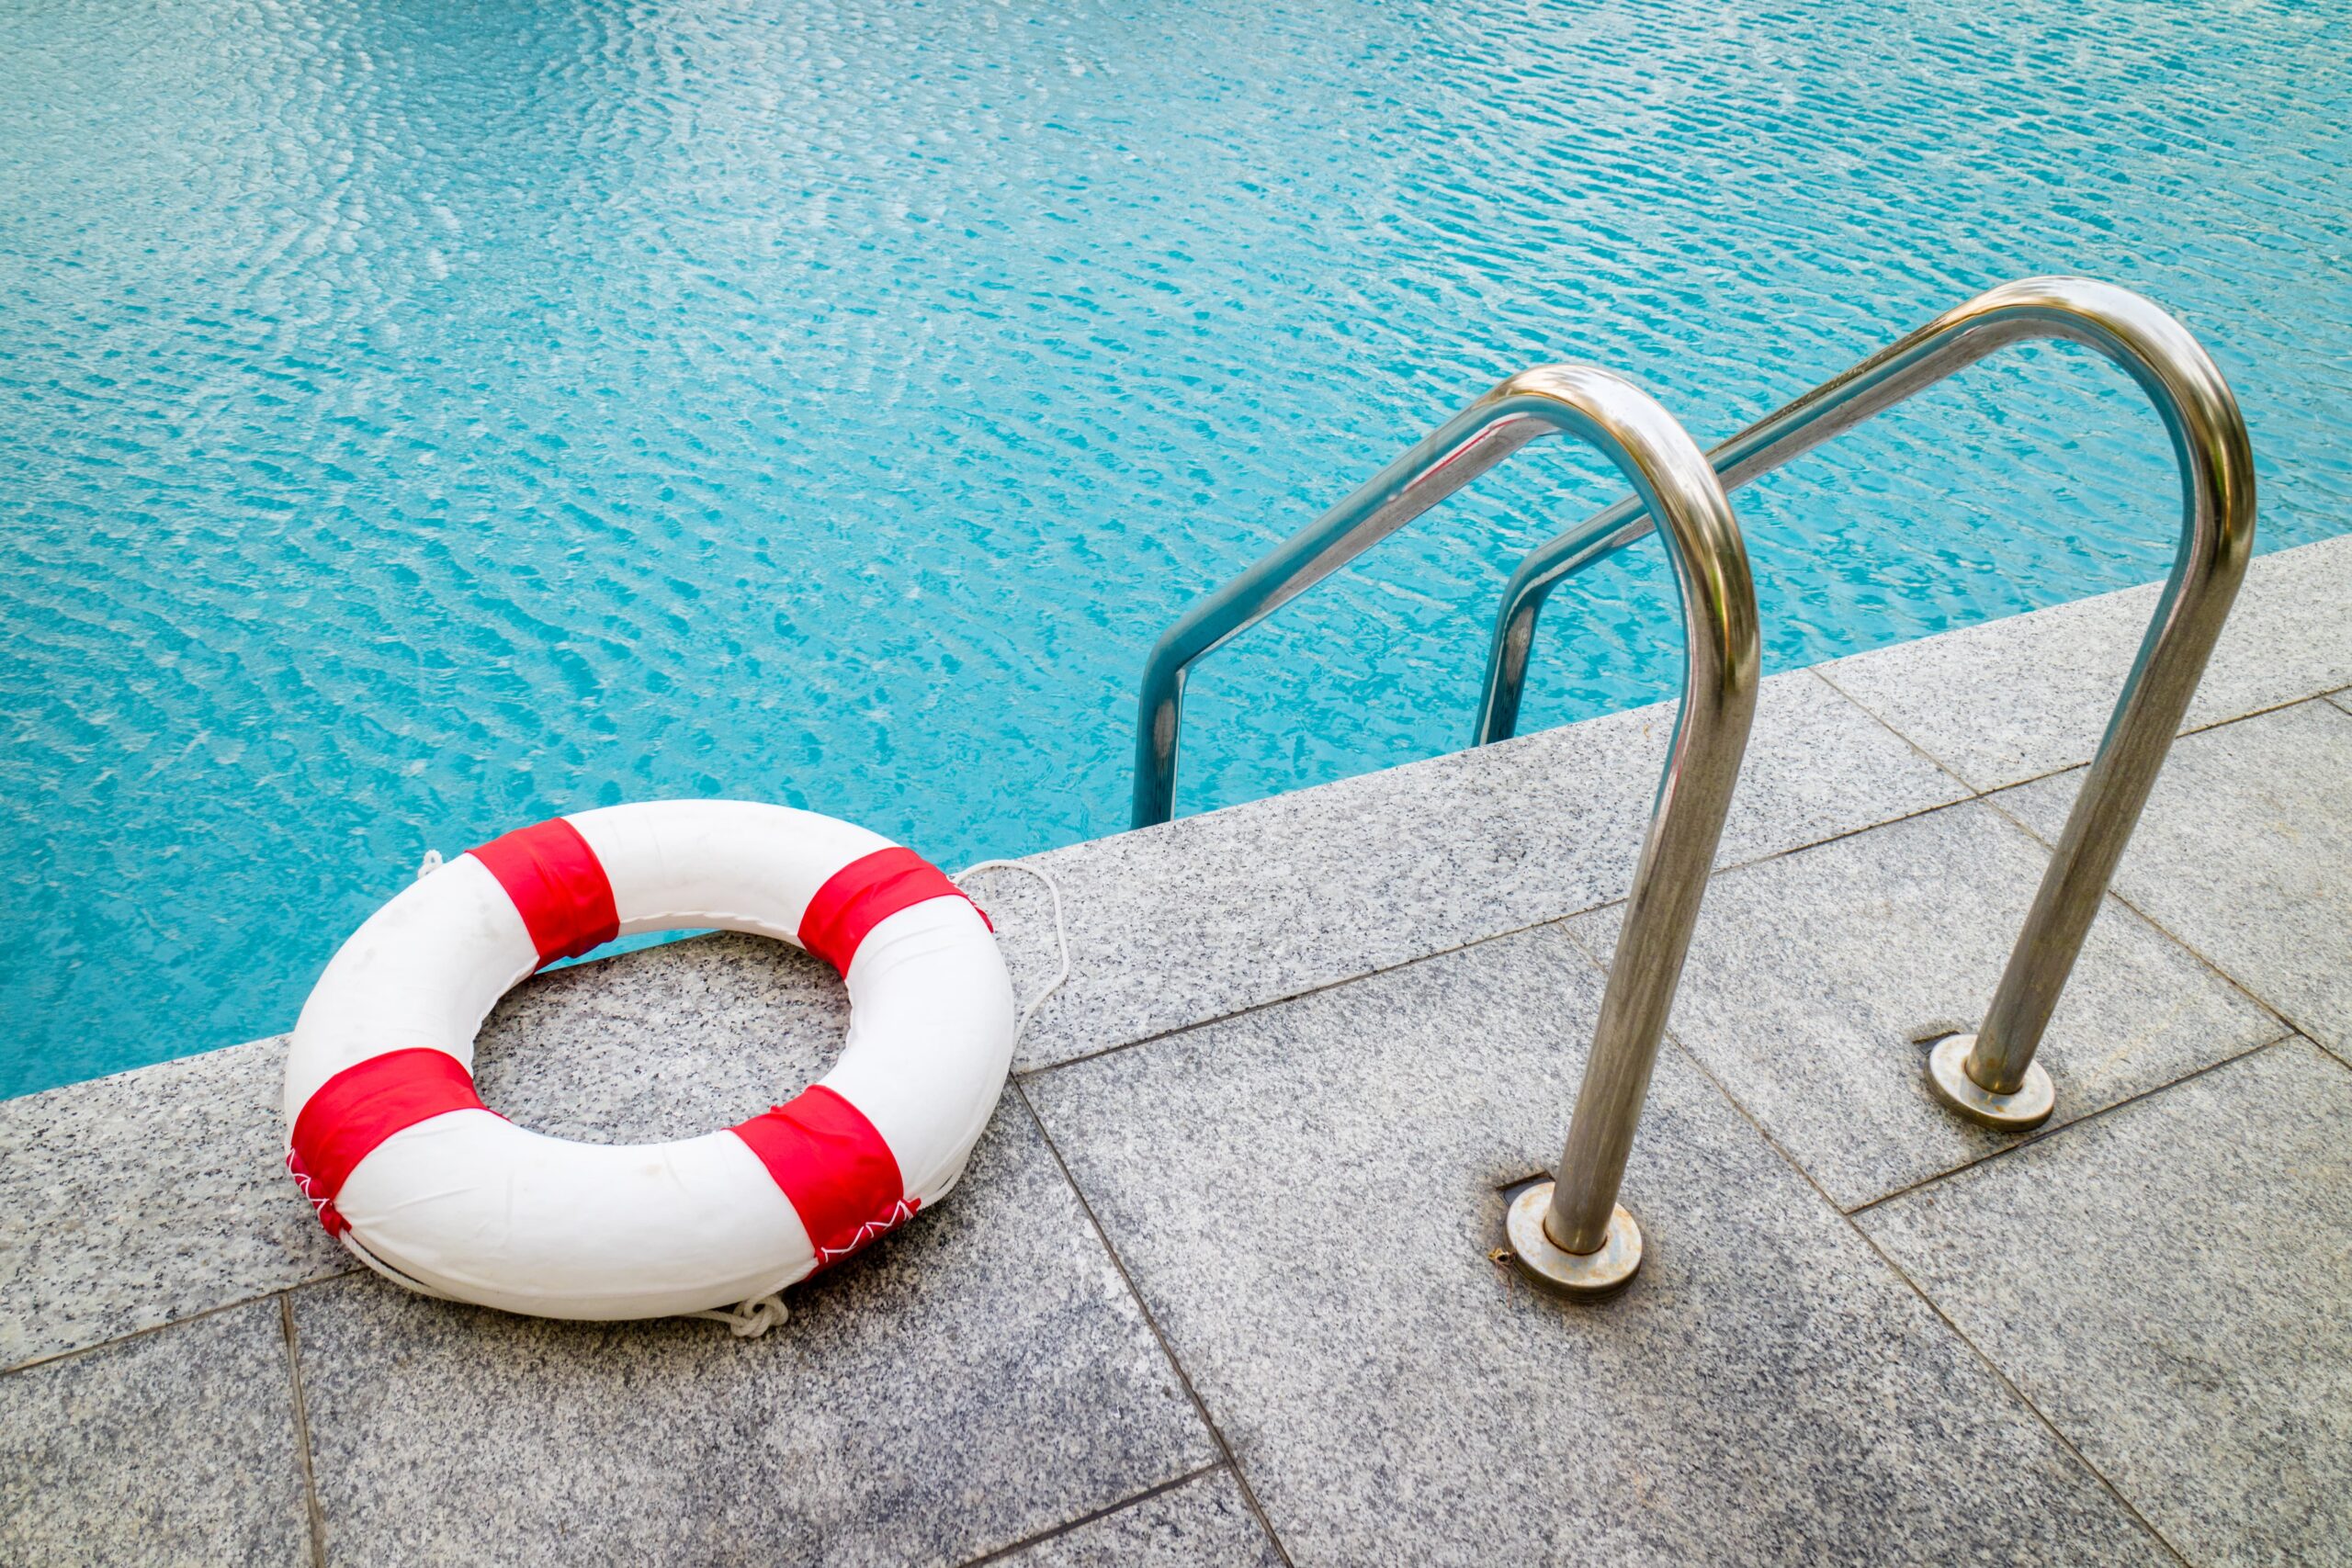 Summertime Pool Safety Can Reduce Serious Injuries